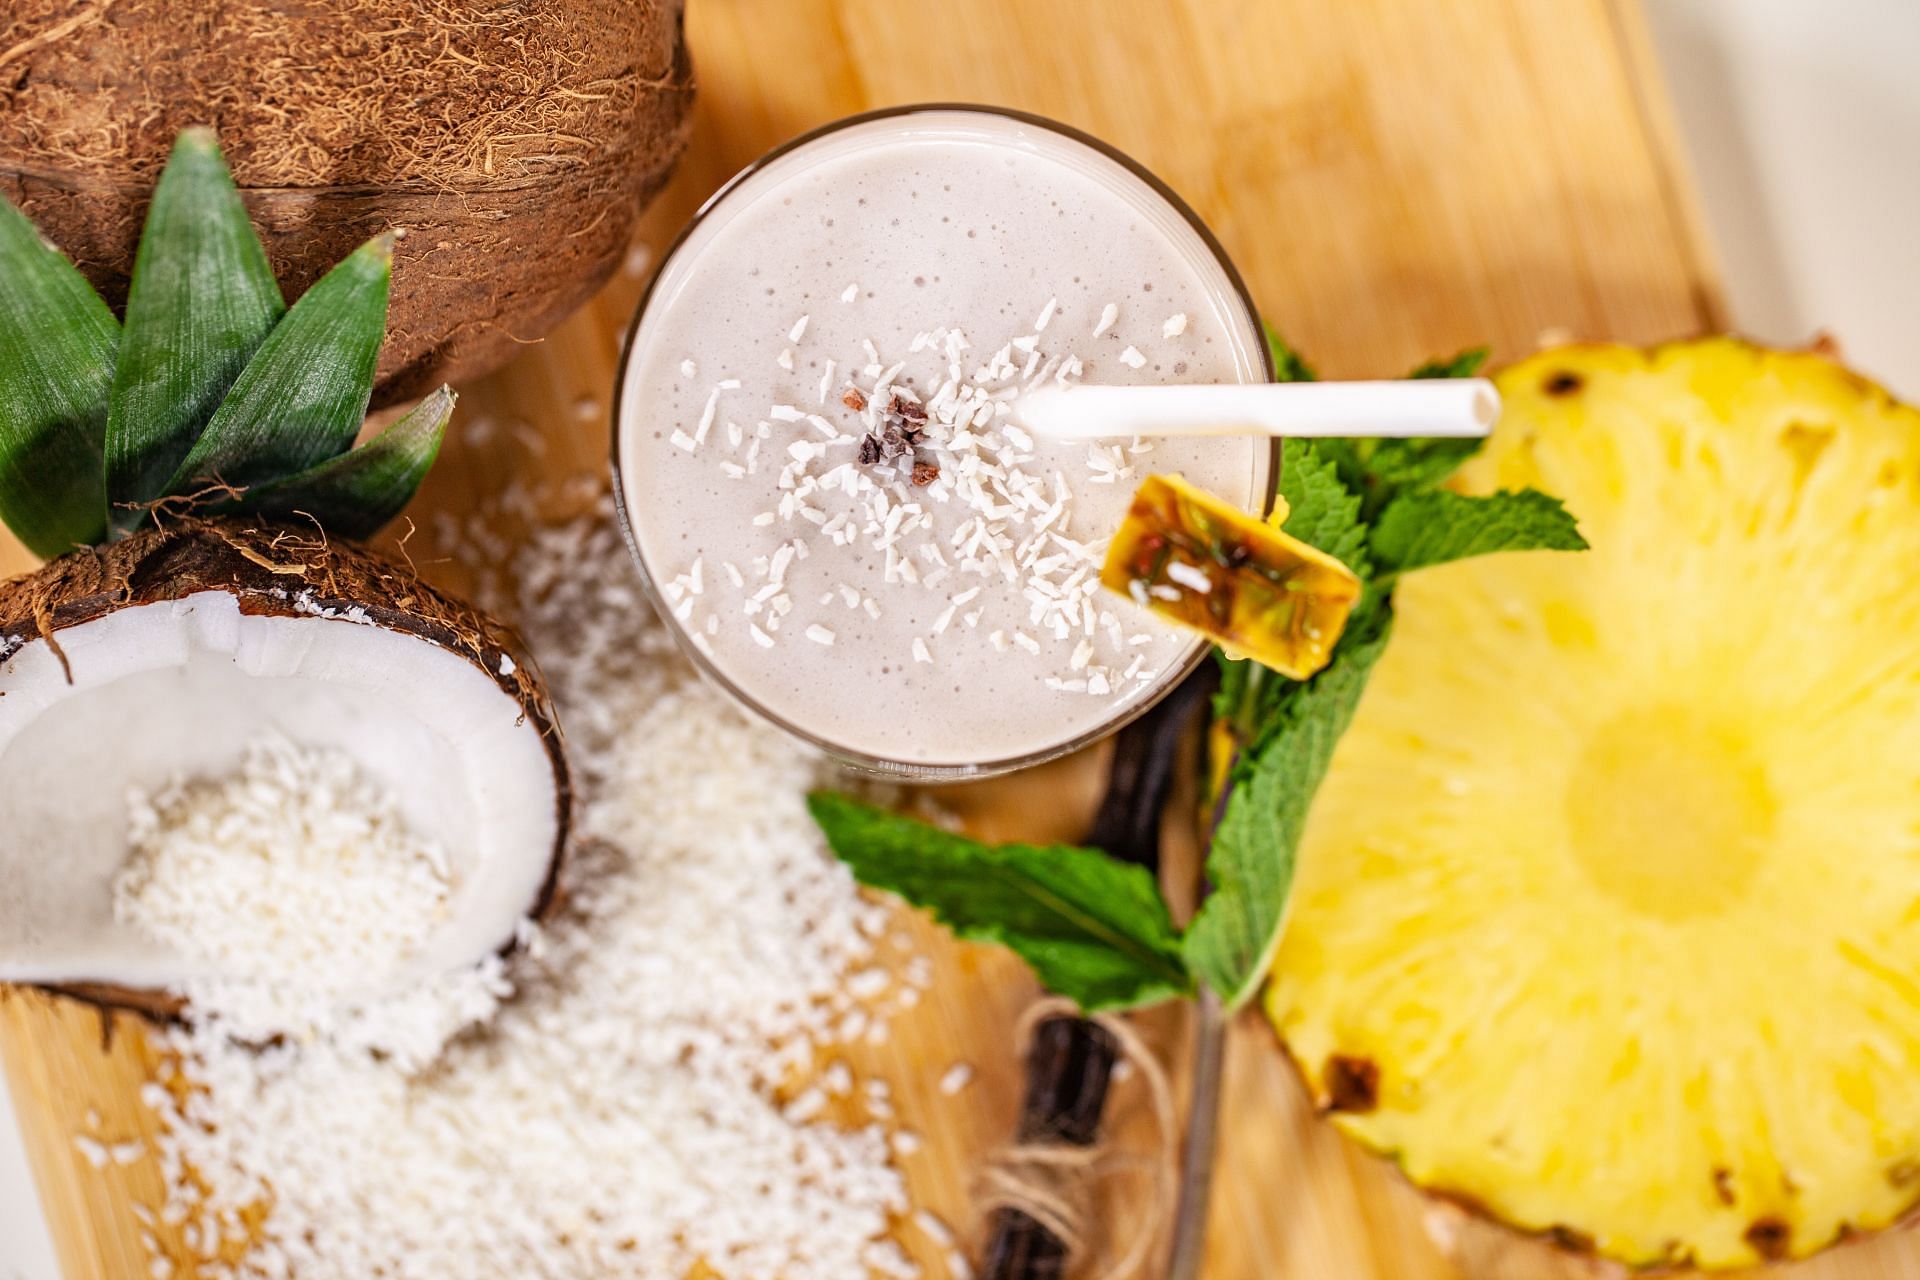 Shakes and smoothies can help with weight loss (Image via Unsplash/Nature Zen)